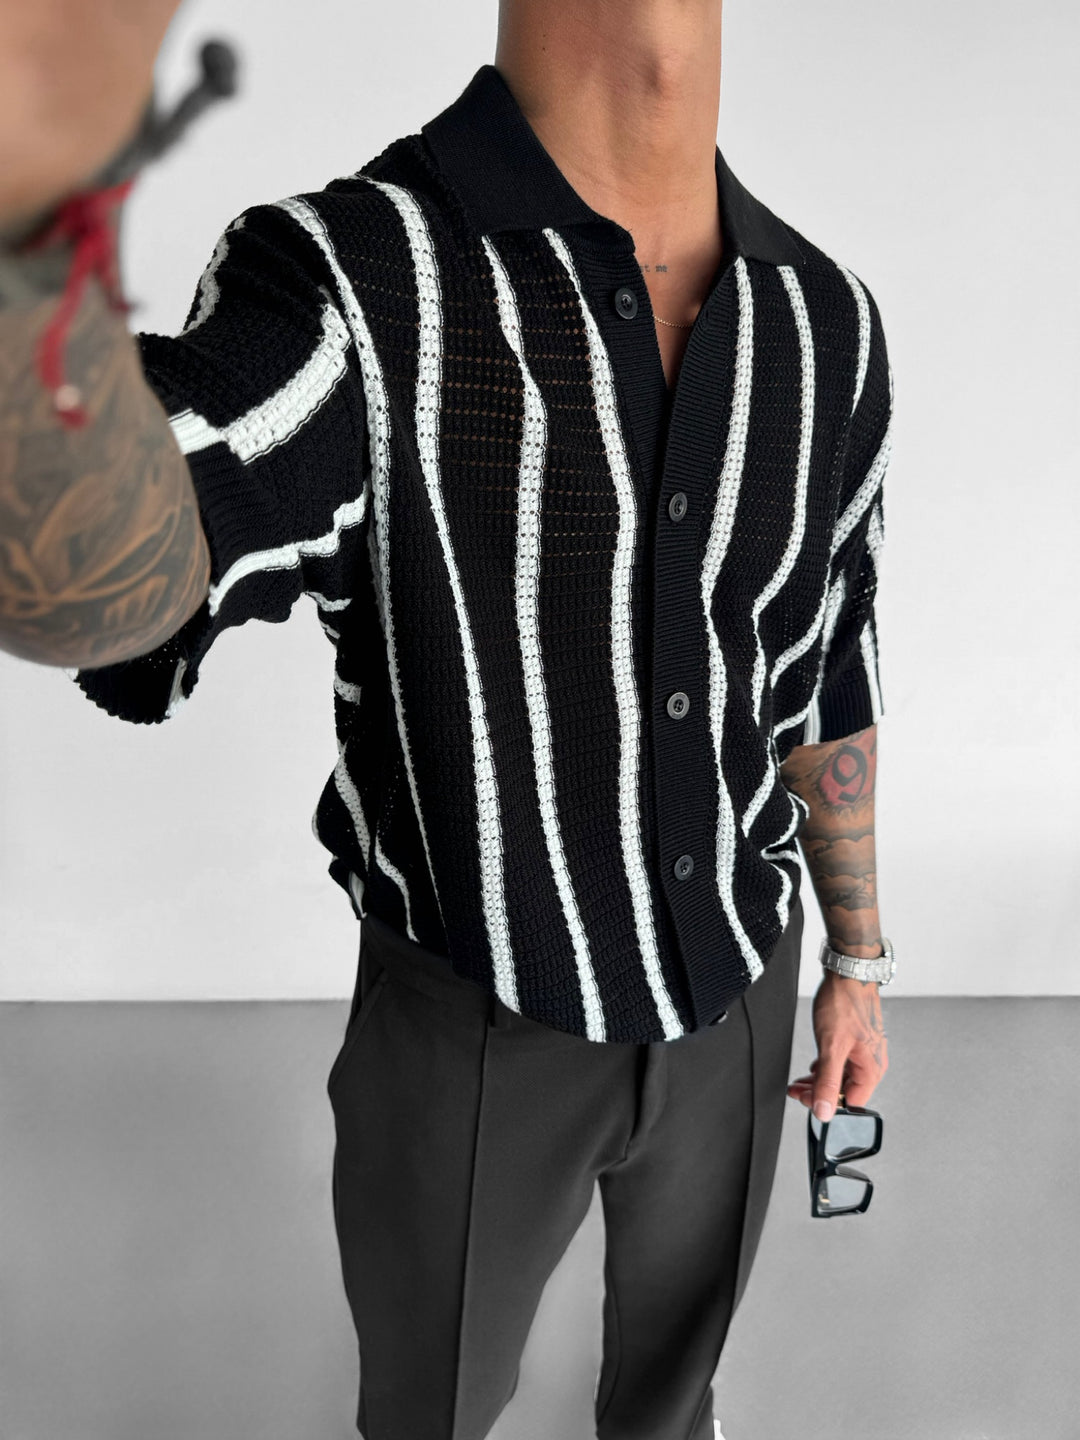 Oversize Knit Lines Shirt - Black and White